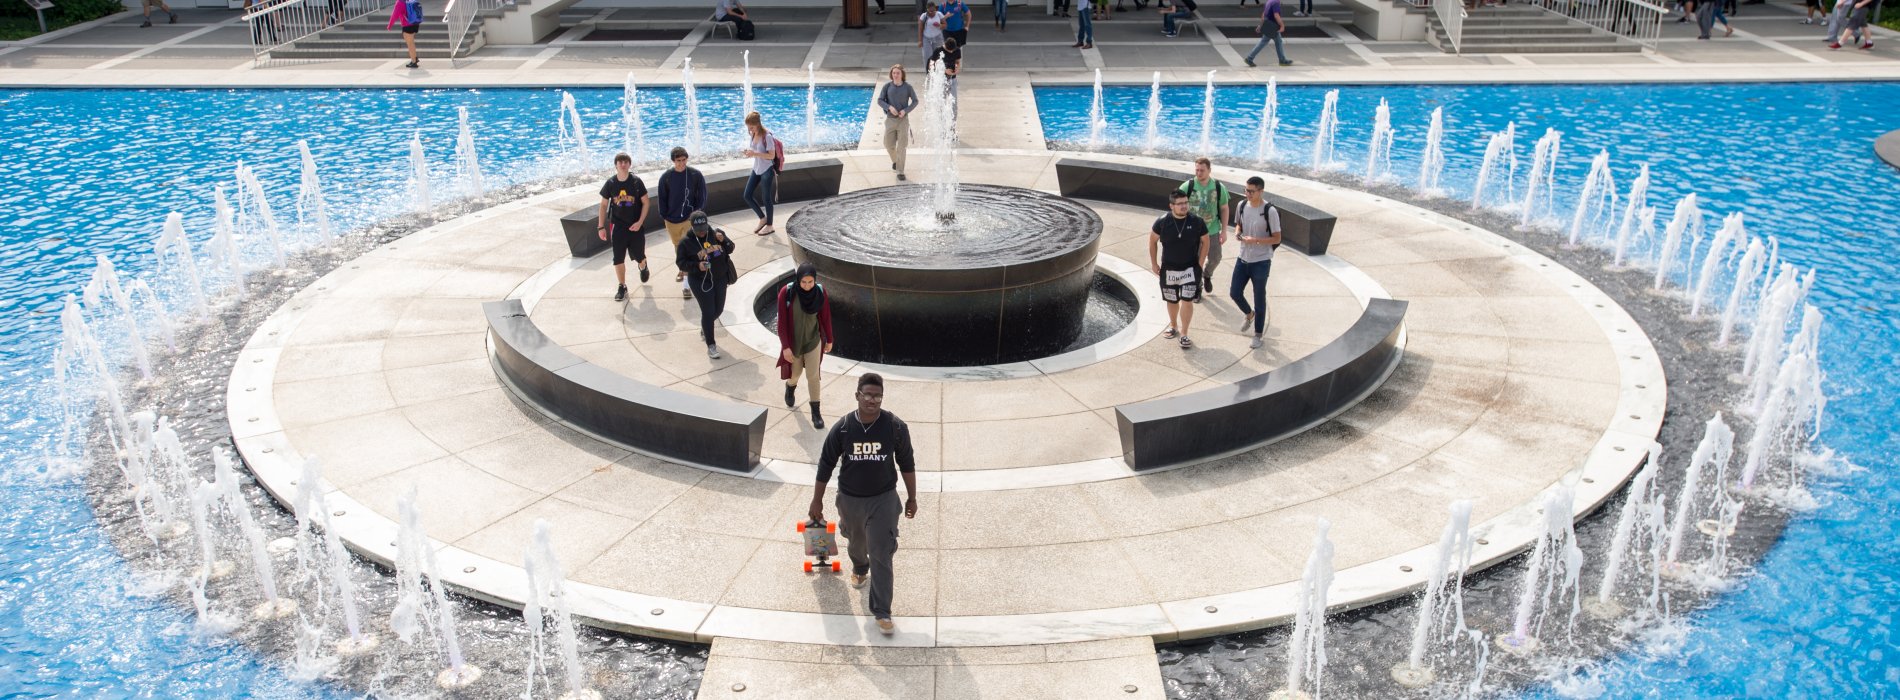 Students walk through UAlbany's academic podium, which includes staircases, overhangs, benches and a fountain.